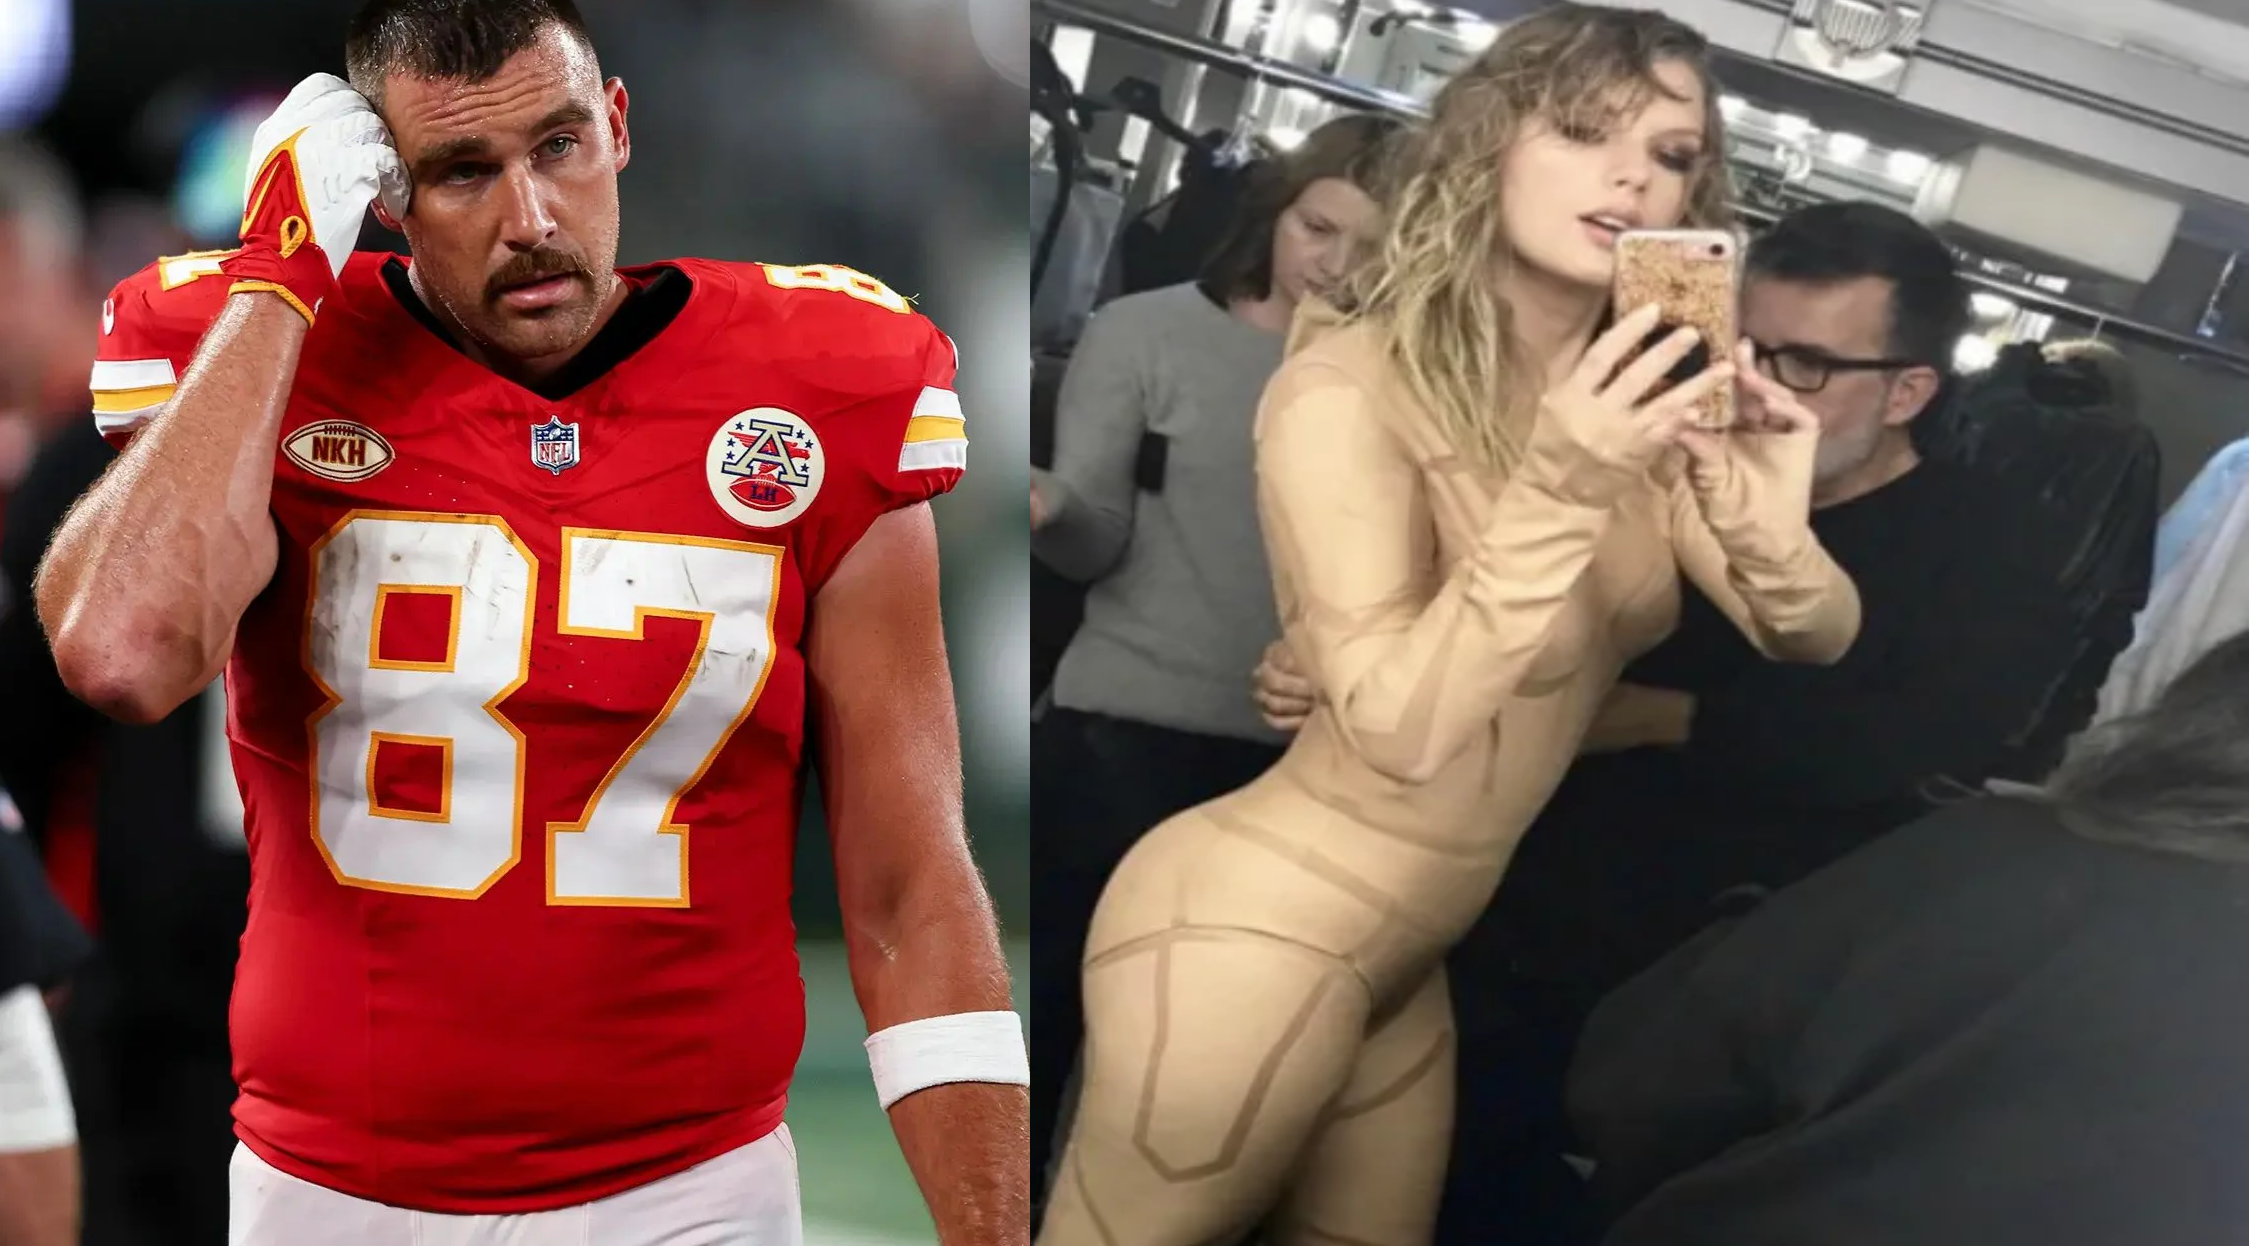 "Travis Kelce expresses disappointment as his girlfriend Taylor Swift faces online backlash for donning see-through outfits."